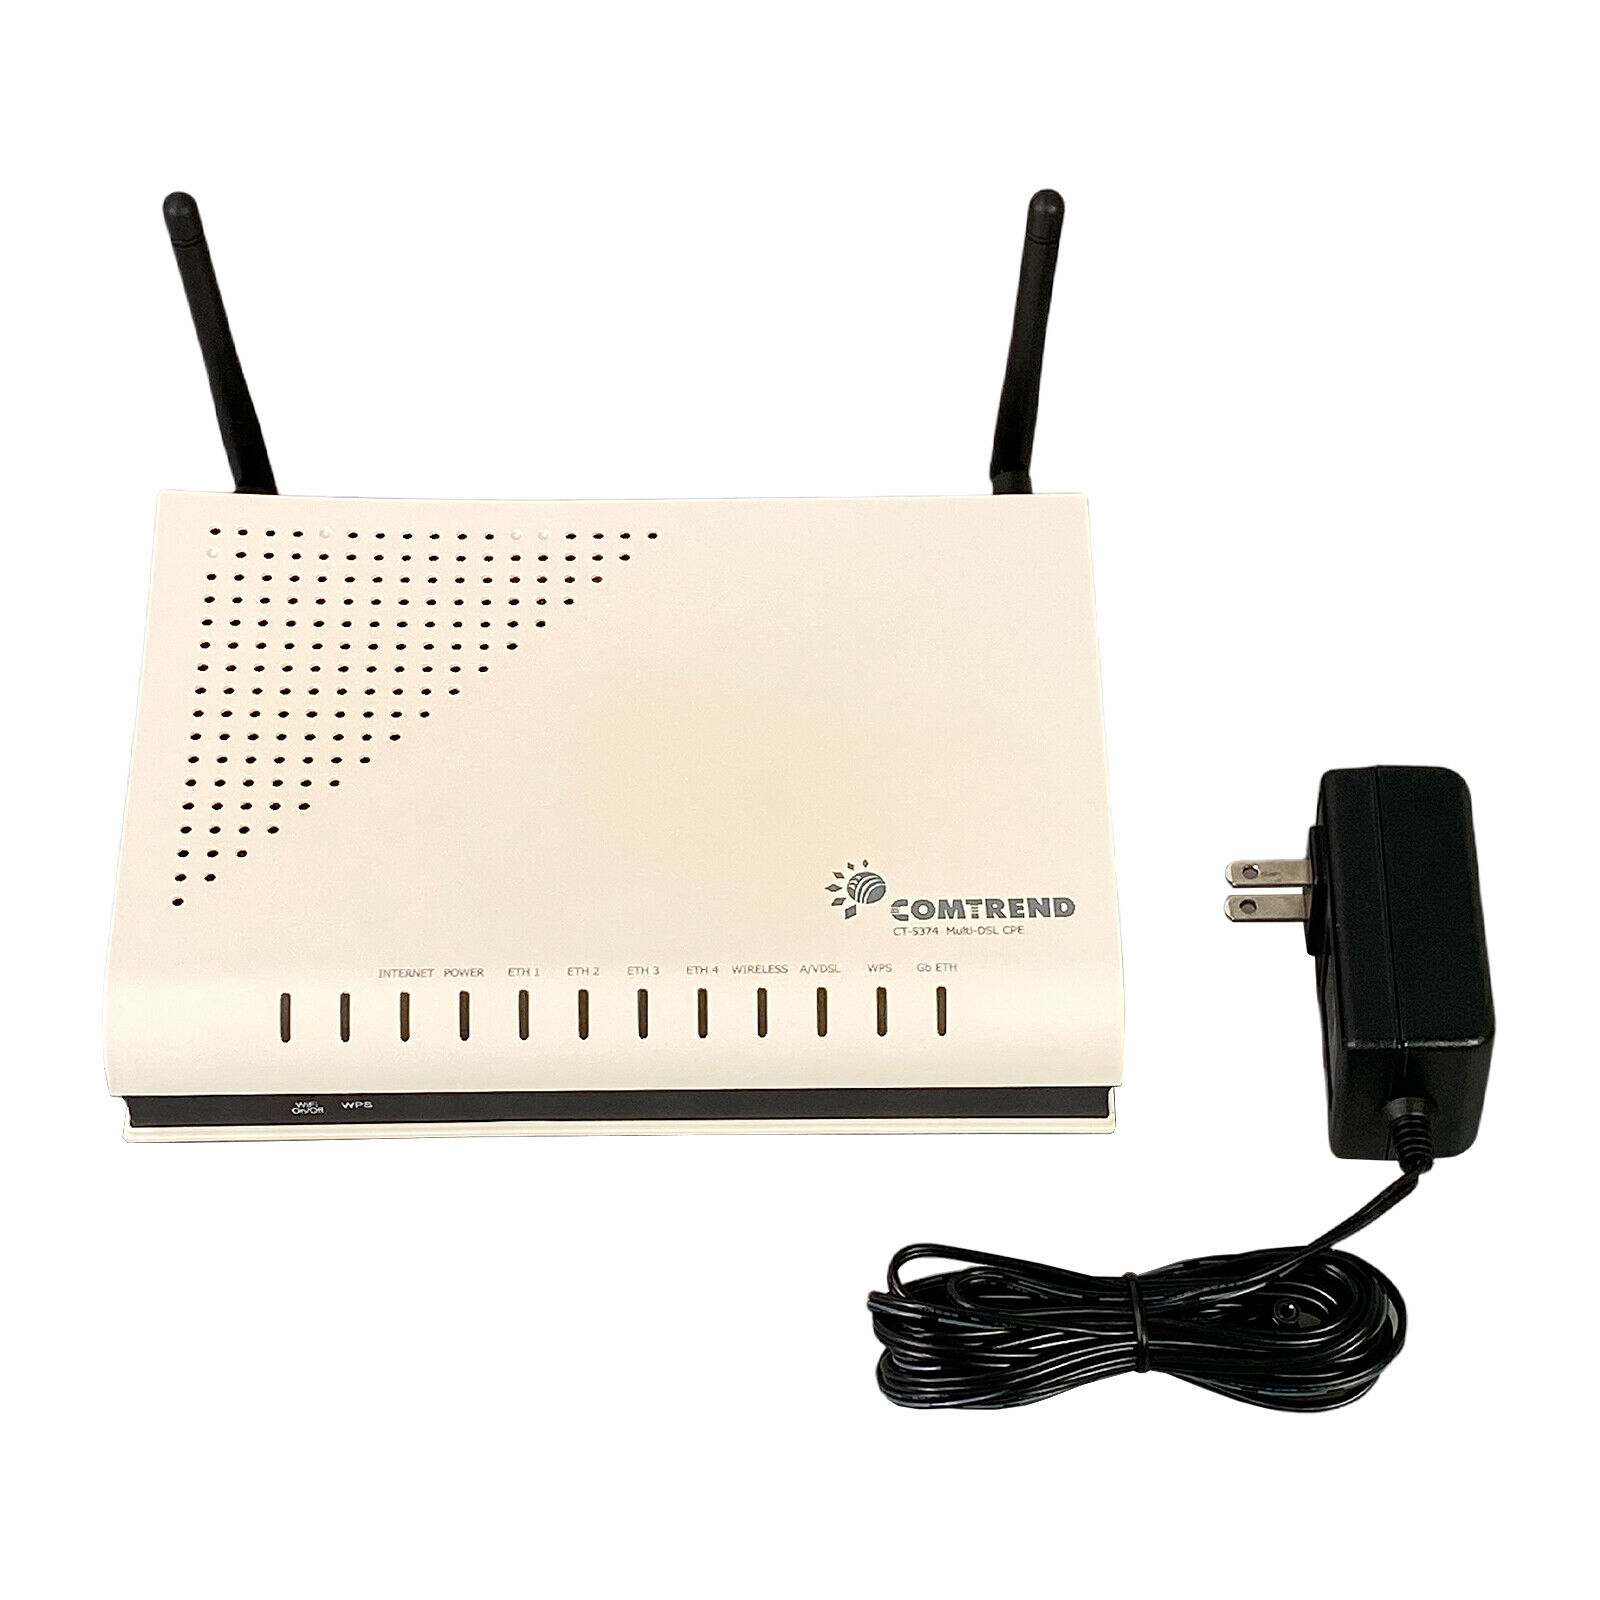 Comtrend CT-5374 Multi DSL CPE Wireless Router 722419-045 with Adapter